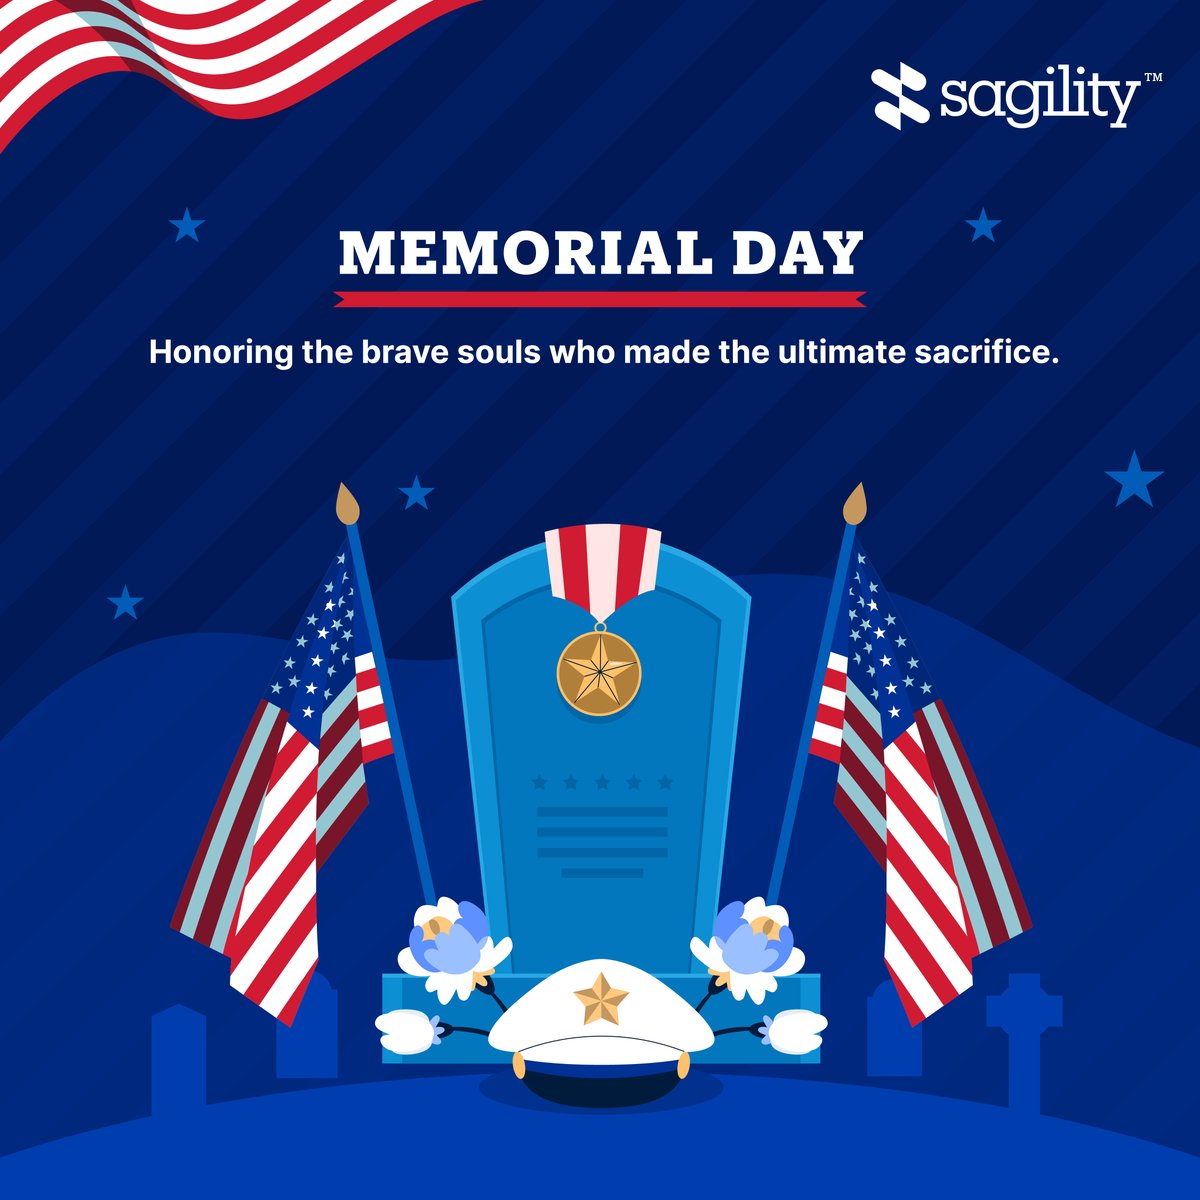 Today, let’s come together to celebrate and remember the brave souls who have served our nation with honor. Their remarkable dedication inspires us all.

#Sagility #WeAreSagility #SOARWithSagility #MemorialDay #USMemorialDay